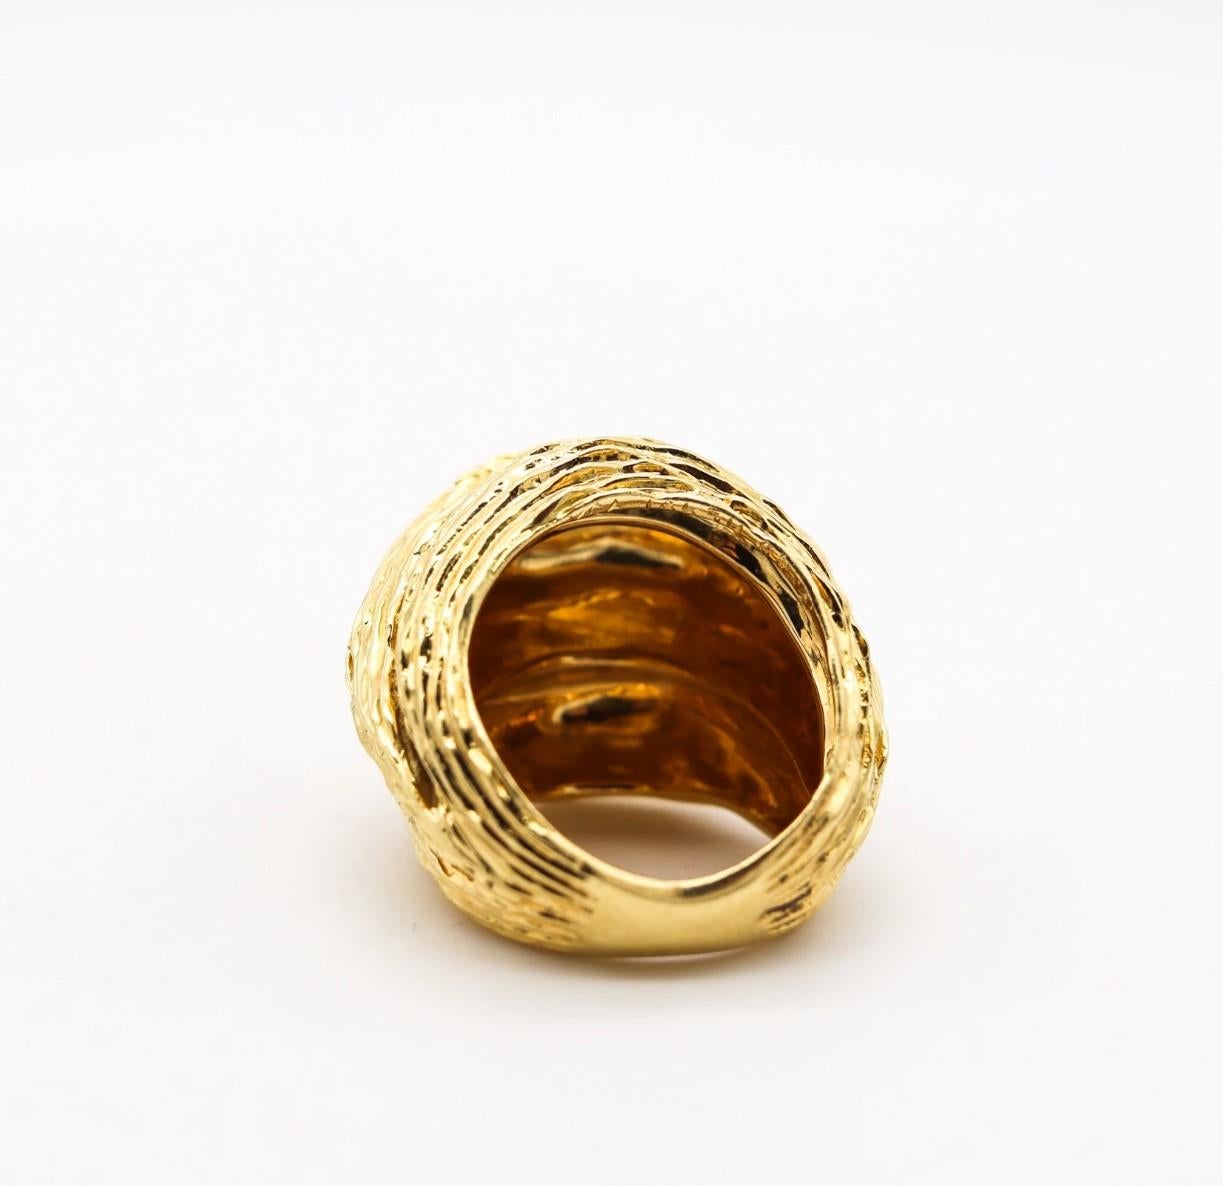 Van Cleef & Arpels 1970 Textured Bombe Cocktail Ring in Solid 18Kt Yellow Gold In Excellent Condition For Sale In Miami, FL